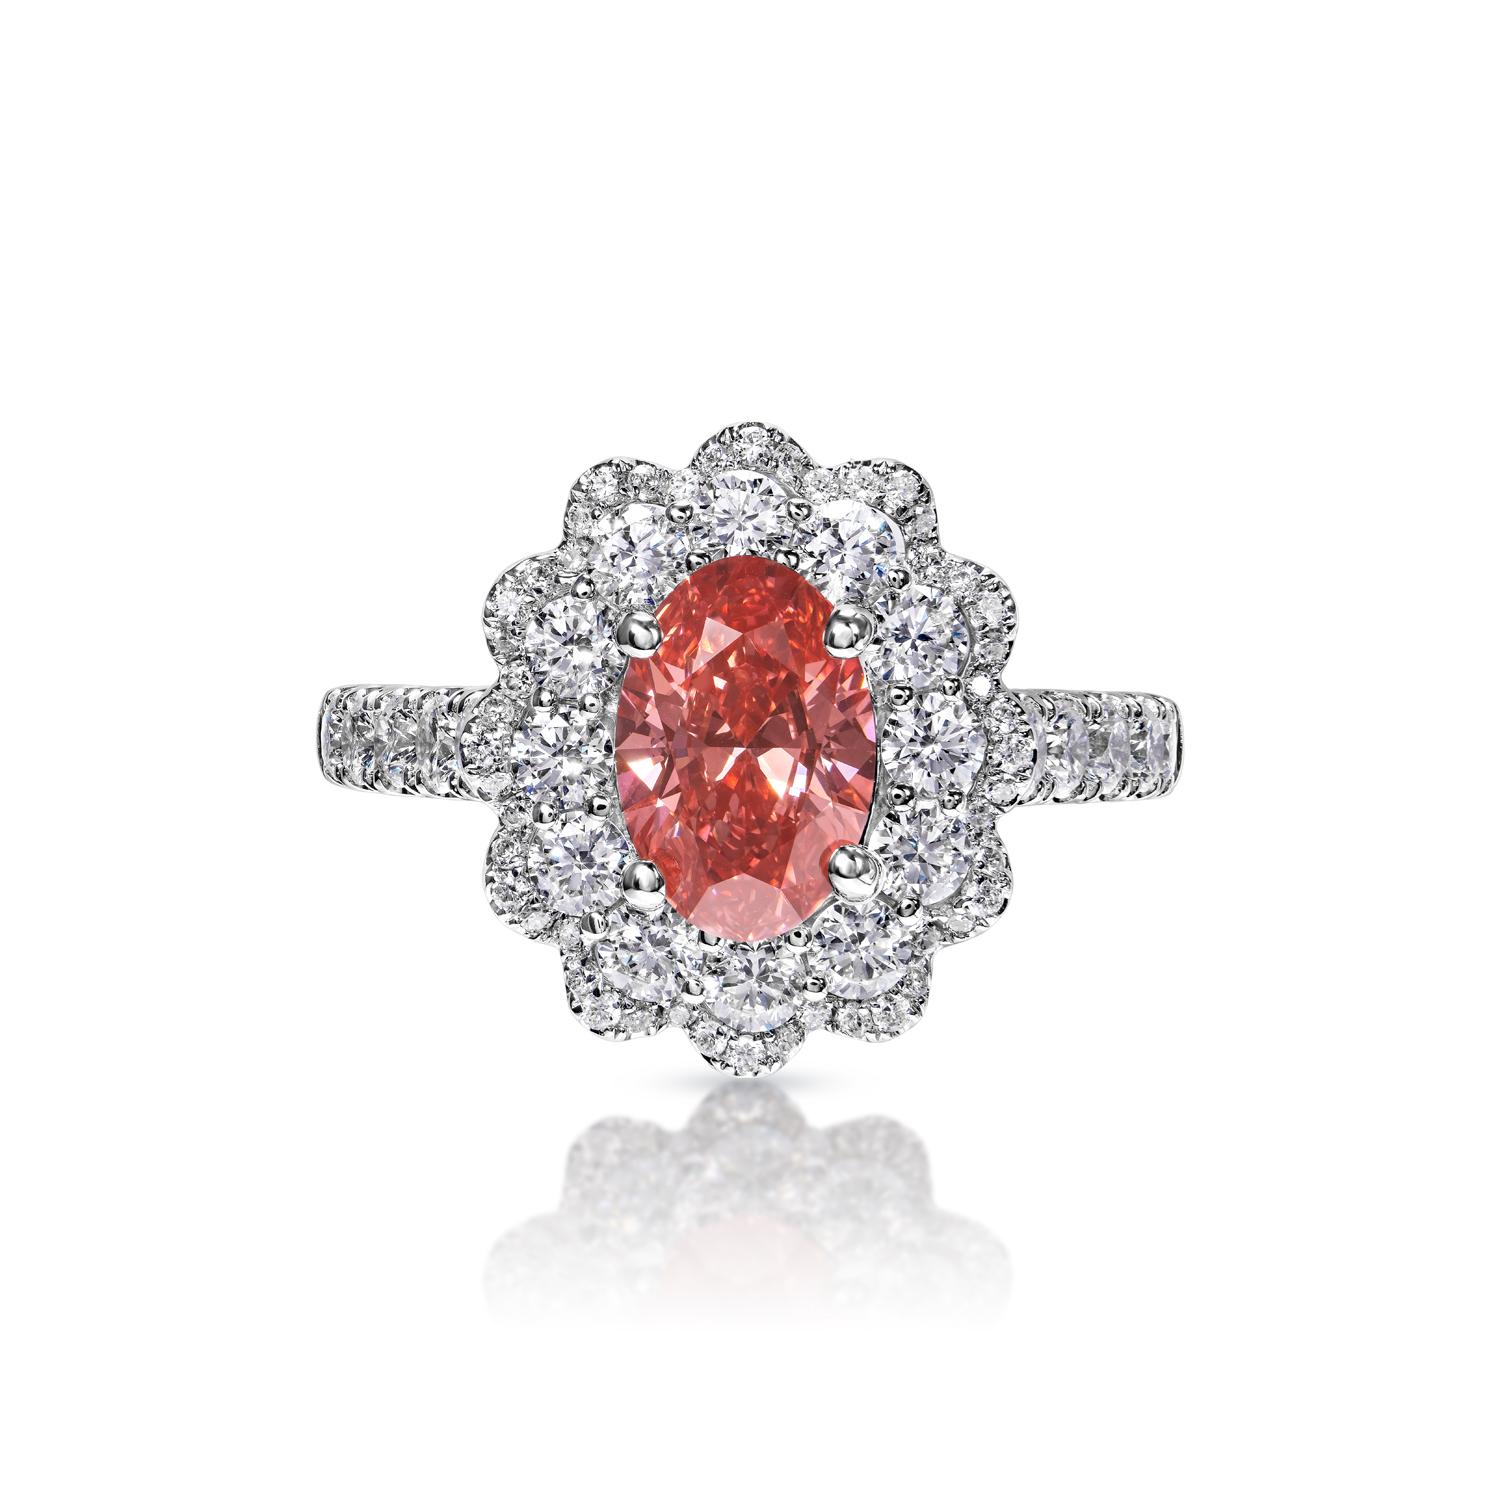 GIA CERTIFIED

Earth Mined Center Diamond:
Carat Weight: 1.06 Carats
Color: Fancy Vivid Pink*
Clarity: VS1
Style: Oval Cut

*This Diamond has been treated by one or more processes to change its color

Carat Weight: 1.13 Carats
Shape: Round Brilliant